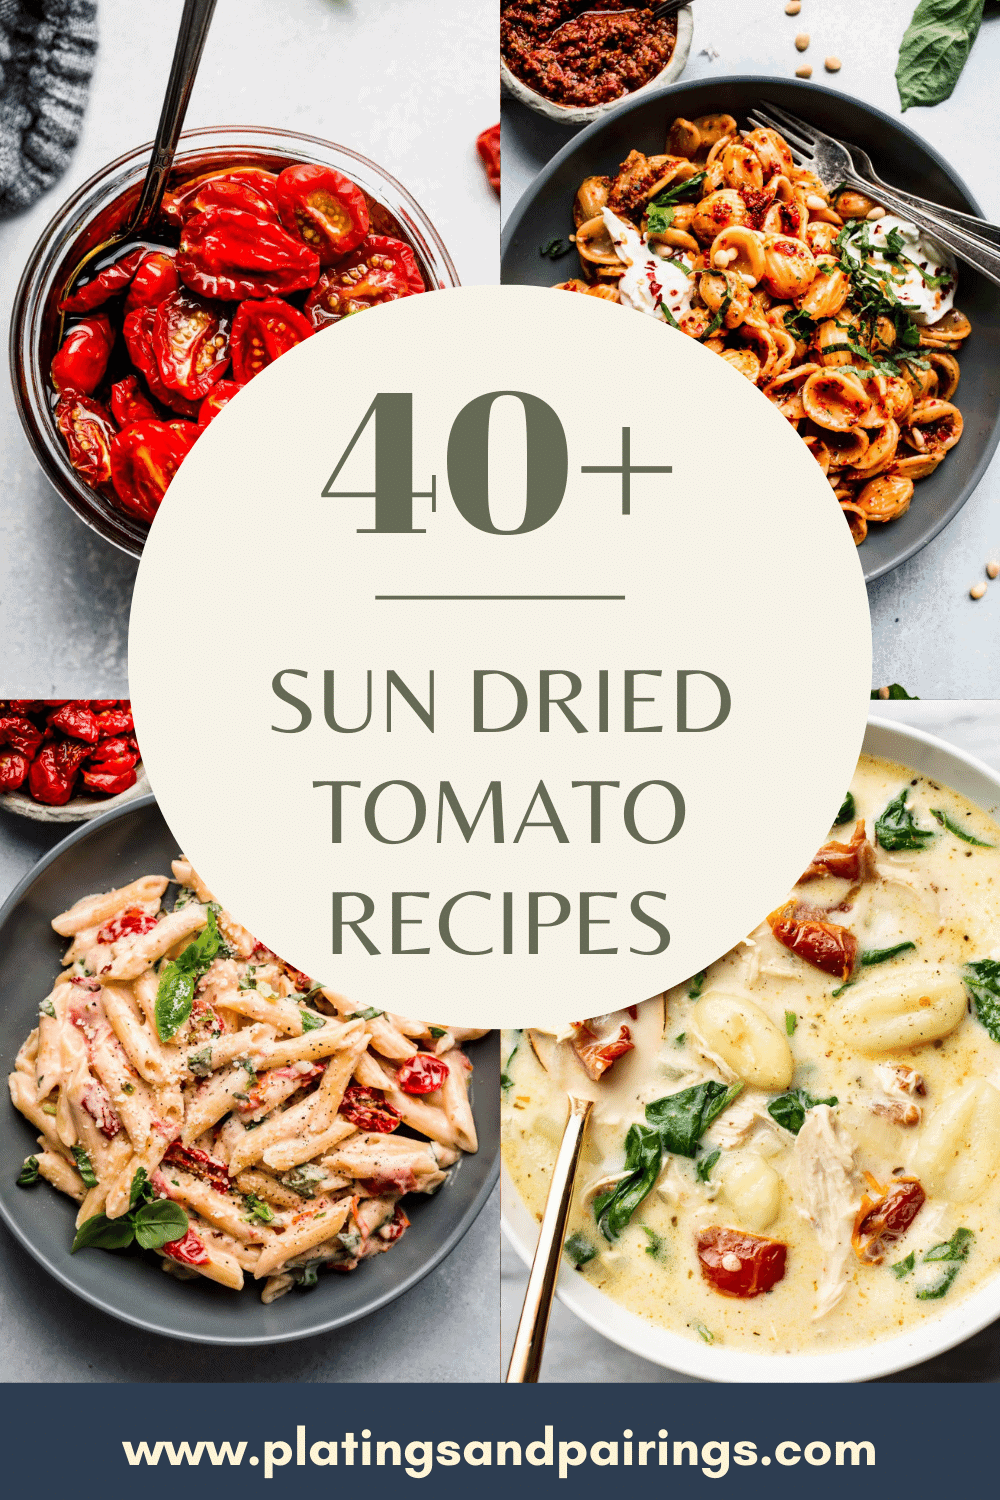 https://www.platingsandpairings.com/wp-content/uploads/2022/07/COVER-SUN-DRIED-TOMATO-RECIPES.png